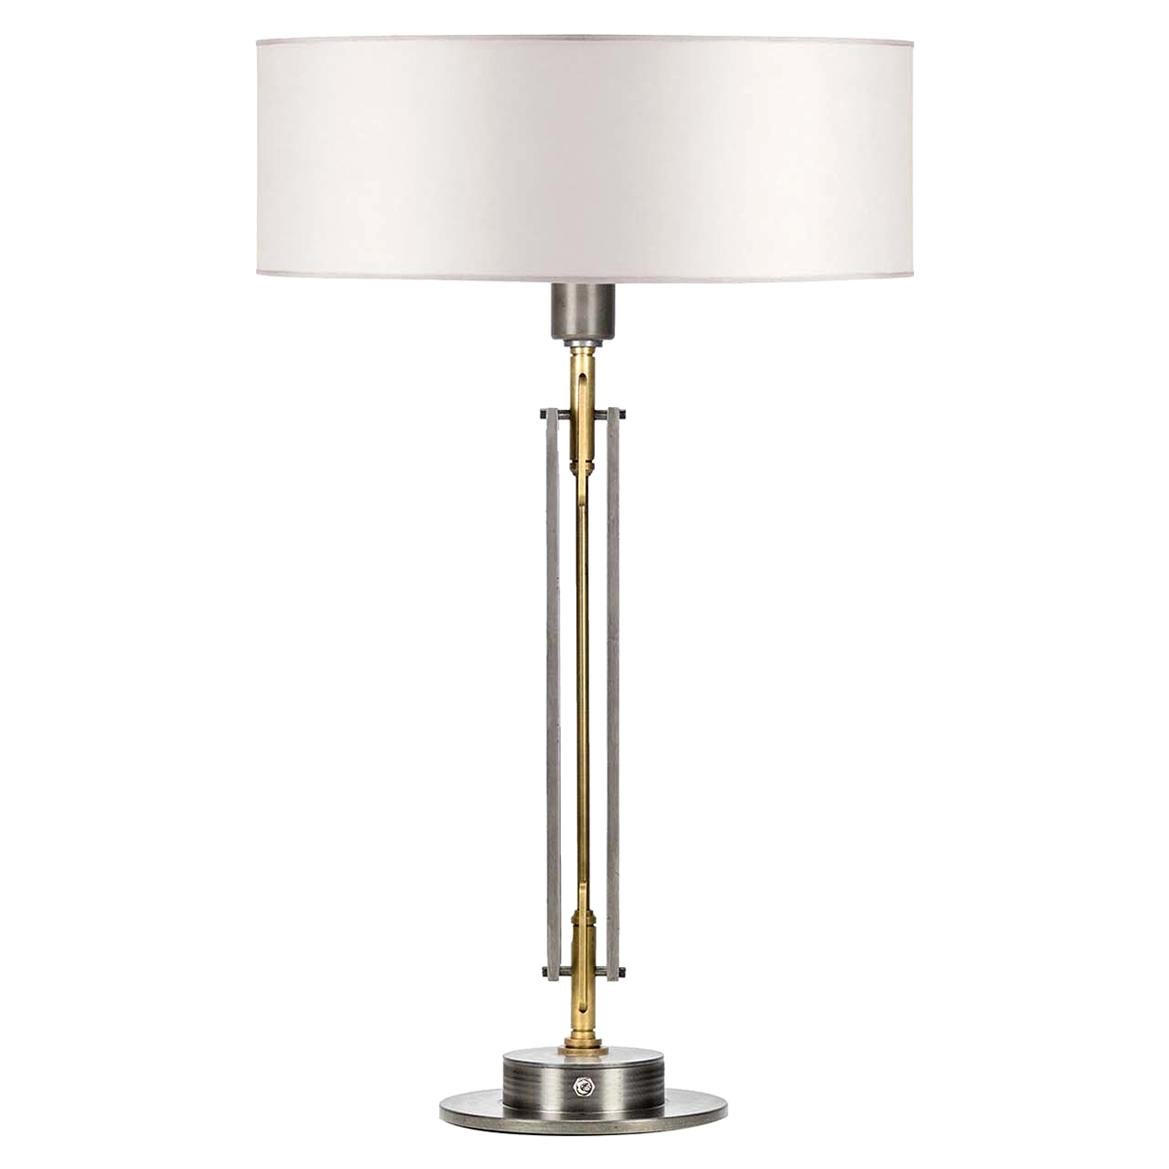 Lenmo White Table Lamp #1 by Acanthus